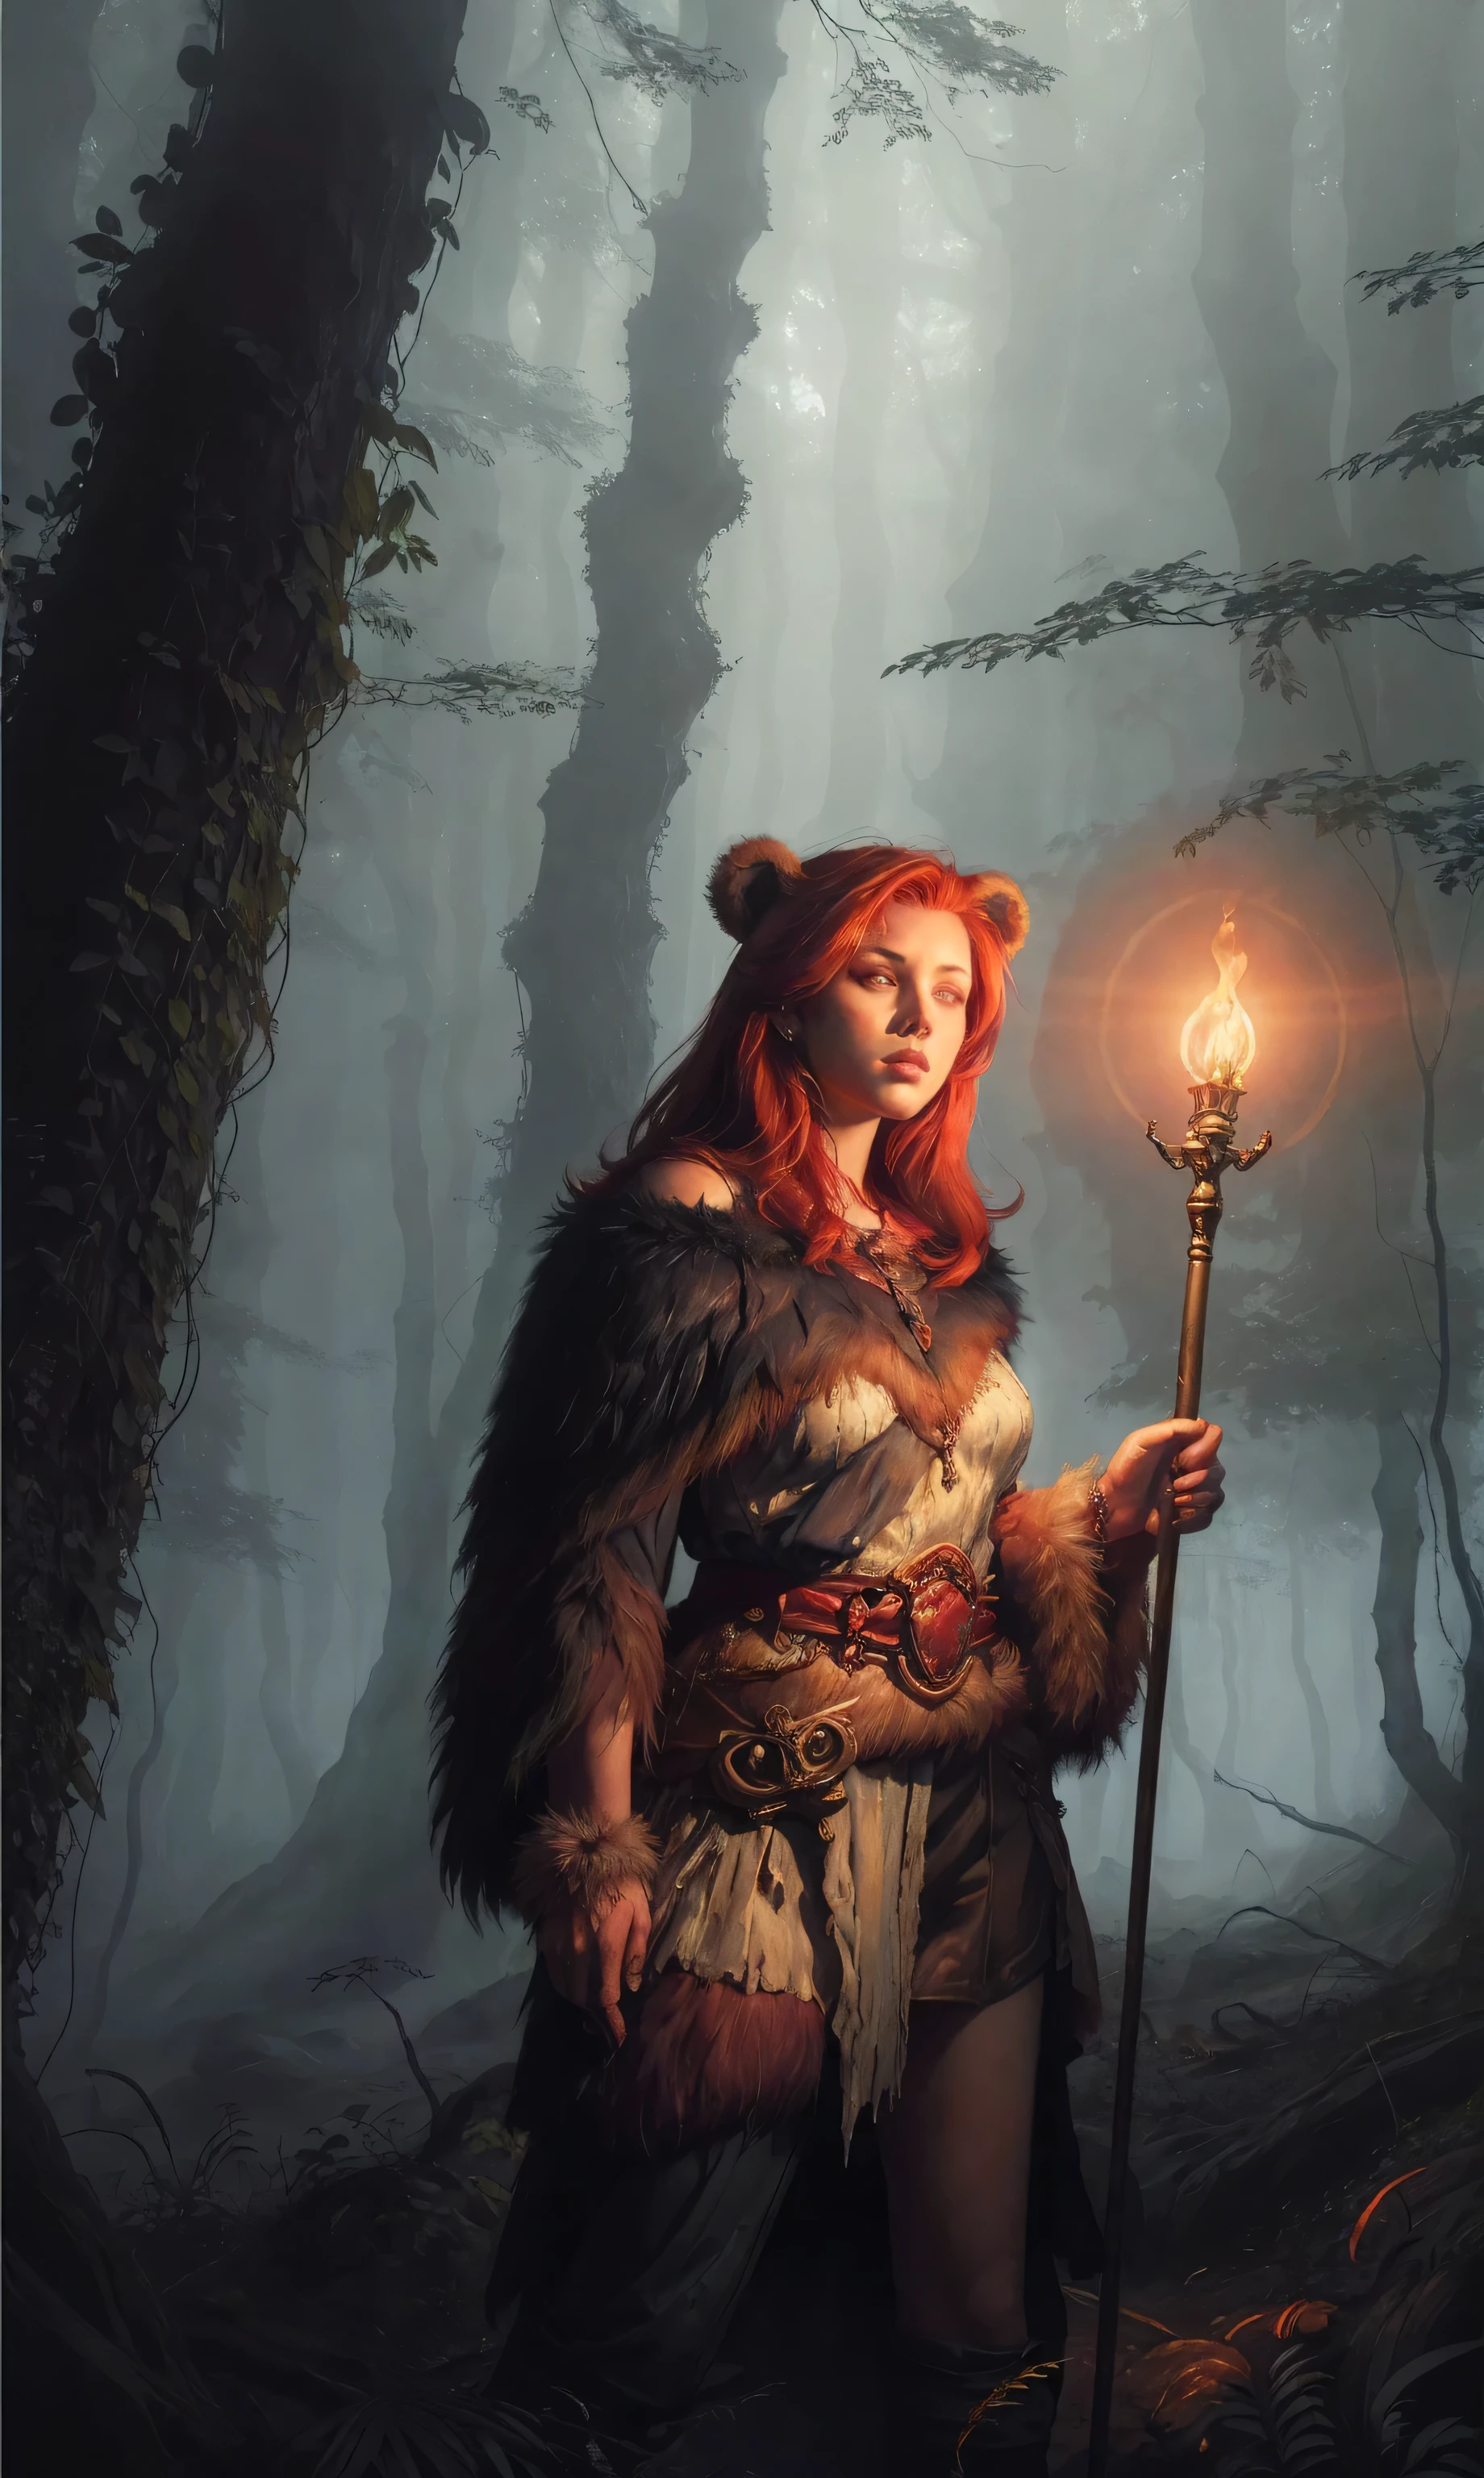 advdnd2023, novel illustration, intricate art, 1girl, female, a woman, redhead, wearing a bear skin, positioned in a dense forest, glowing red eyes, holding a torch, gloomy atmosphere with fog, detailed painting style, realistic light and shadows, painting, open field